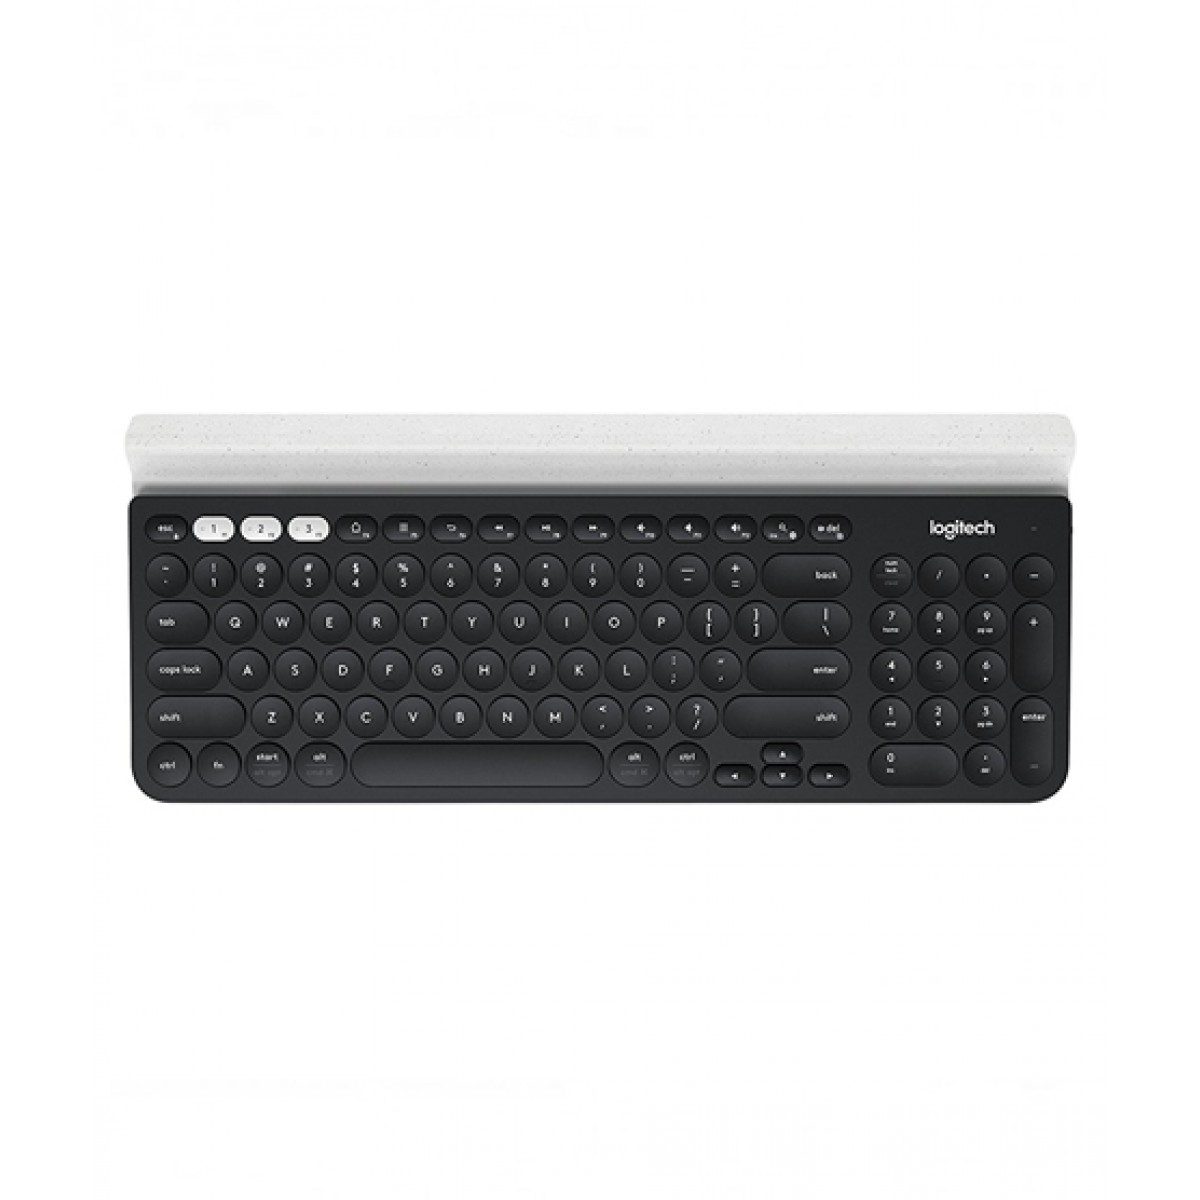 Logitech 920-009415 / 920-009416 Wireless Mx Keys Illuminated Keyboard – With Easy-Switch Keys To Connect Upto 3 Devices – Usb Type-C Rechargeable Wifi+Bluetooth Dual Connection For Windows + Android + Ios + Mac – Usb Nano Unifying Receiver – 2 Years W